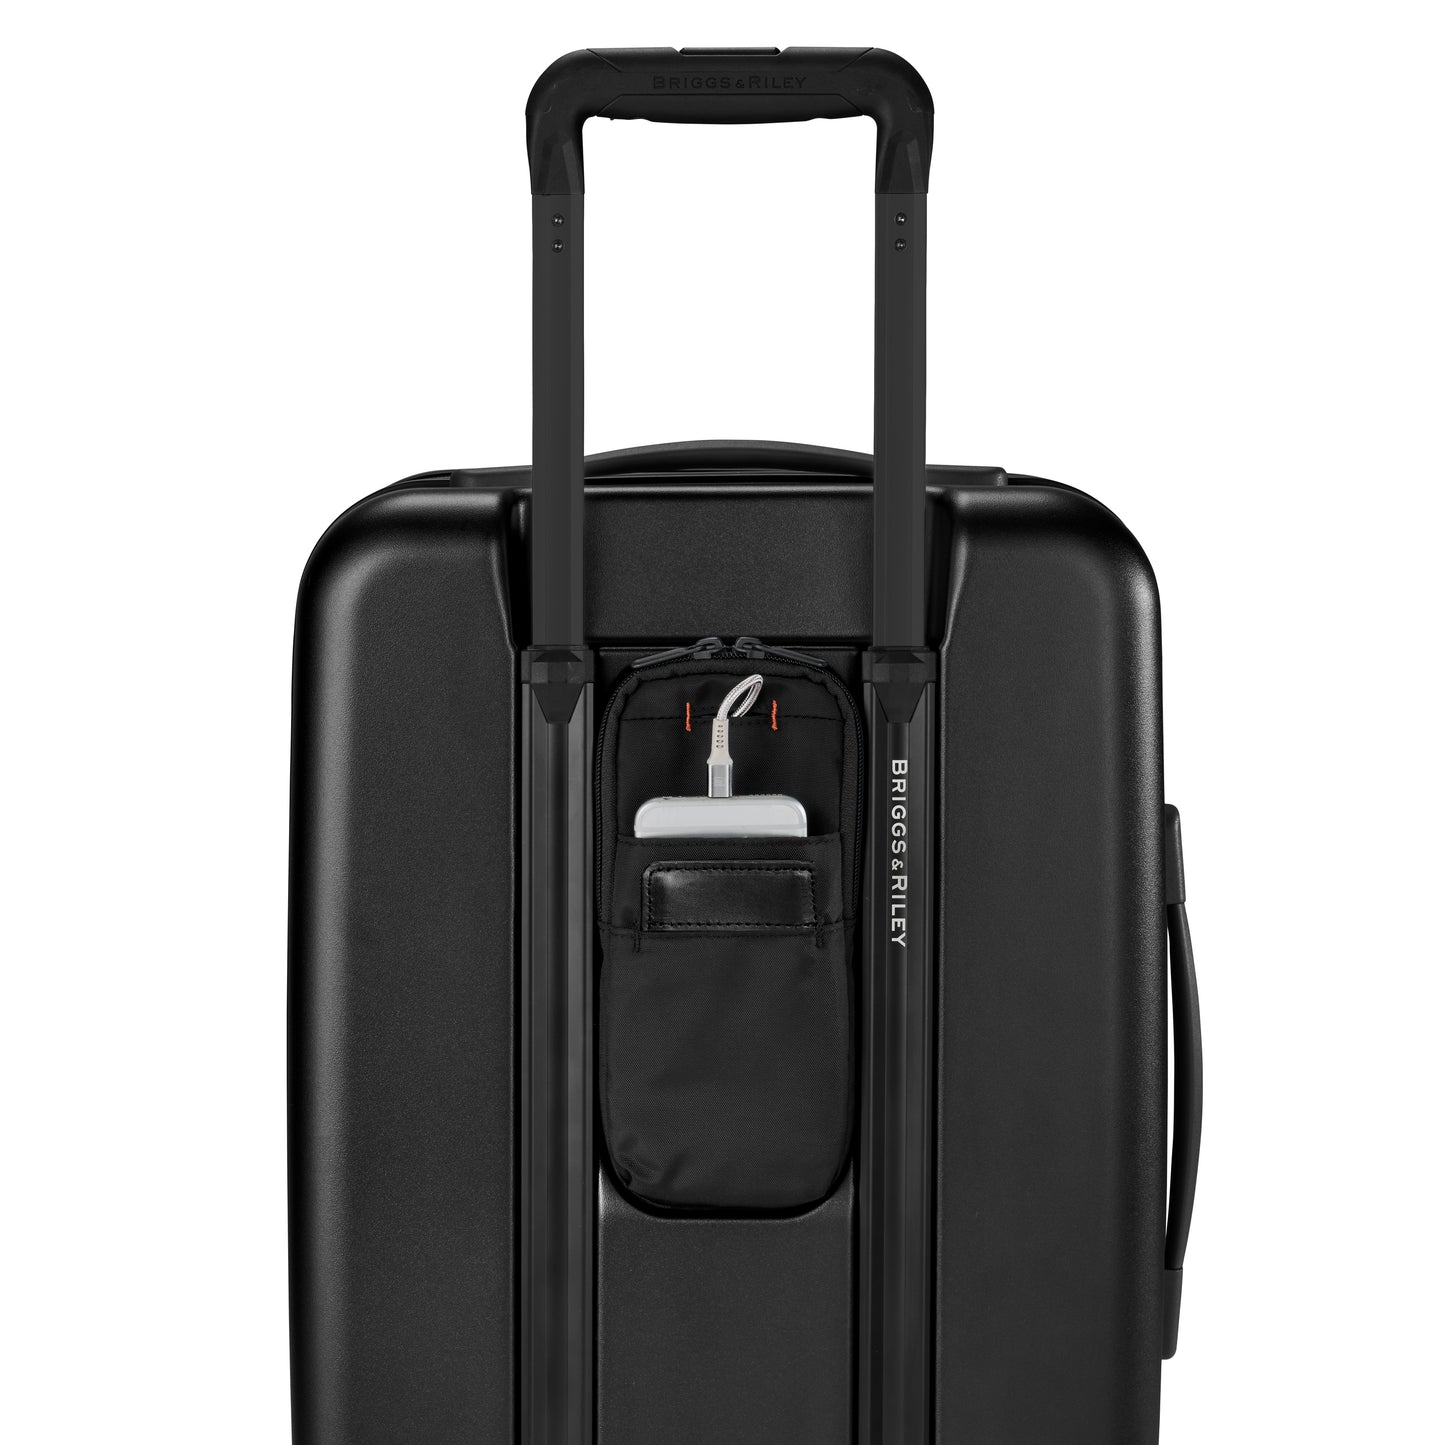 On Sale - Briggs & Riley Hardsided SYMPATICO Domestic 22" Carry-On Expandable Spinner